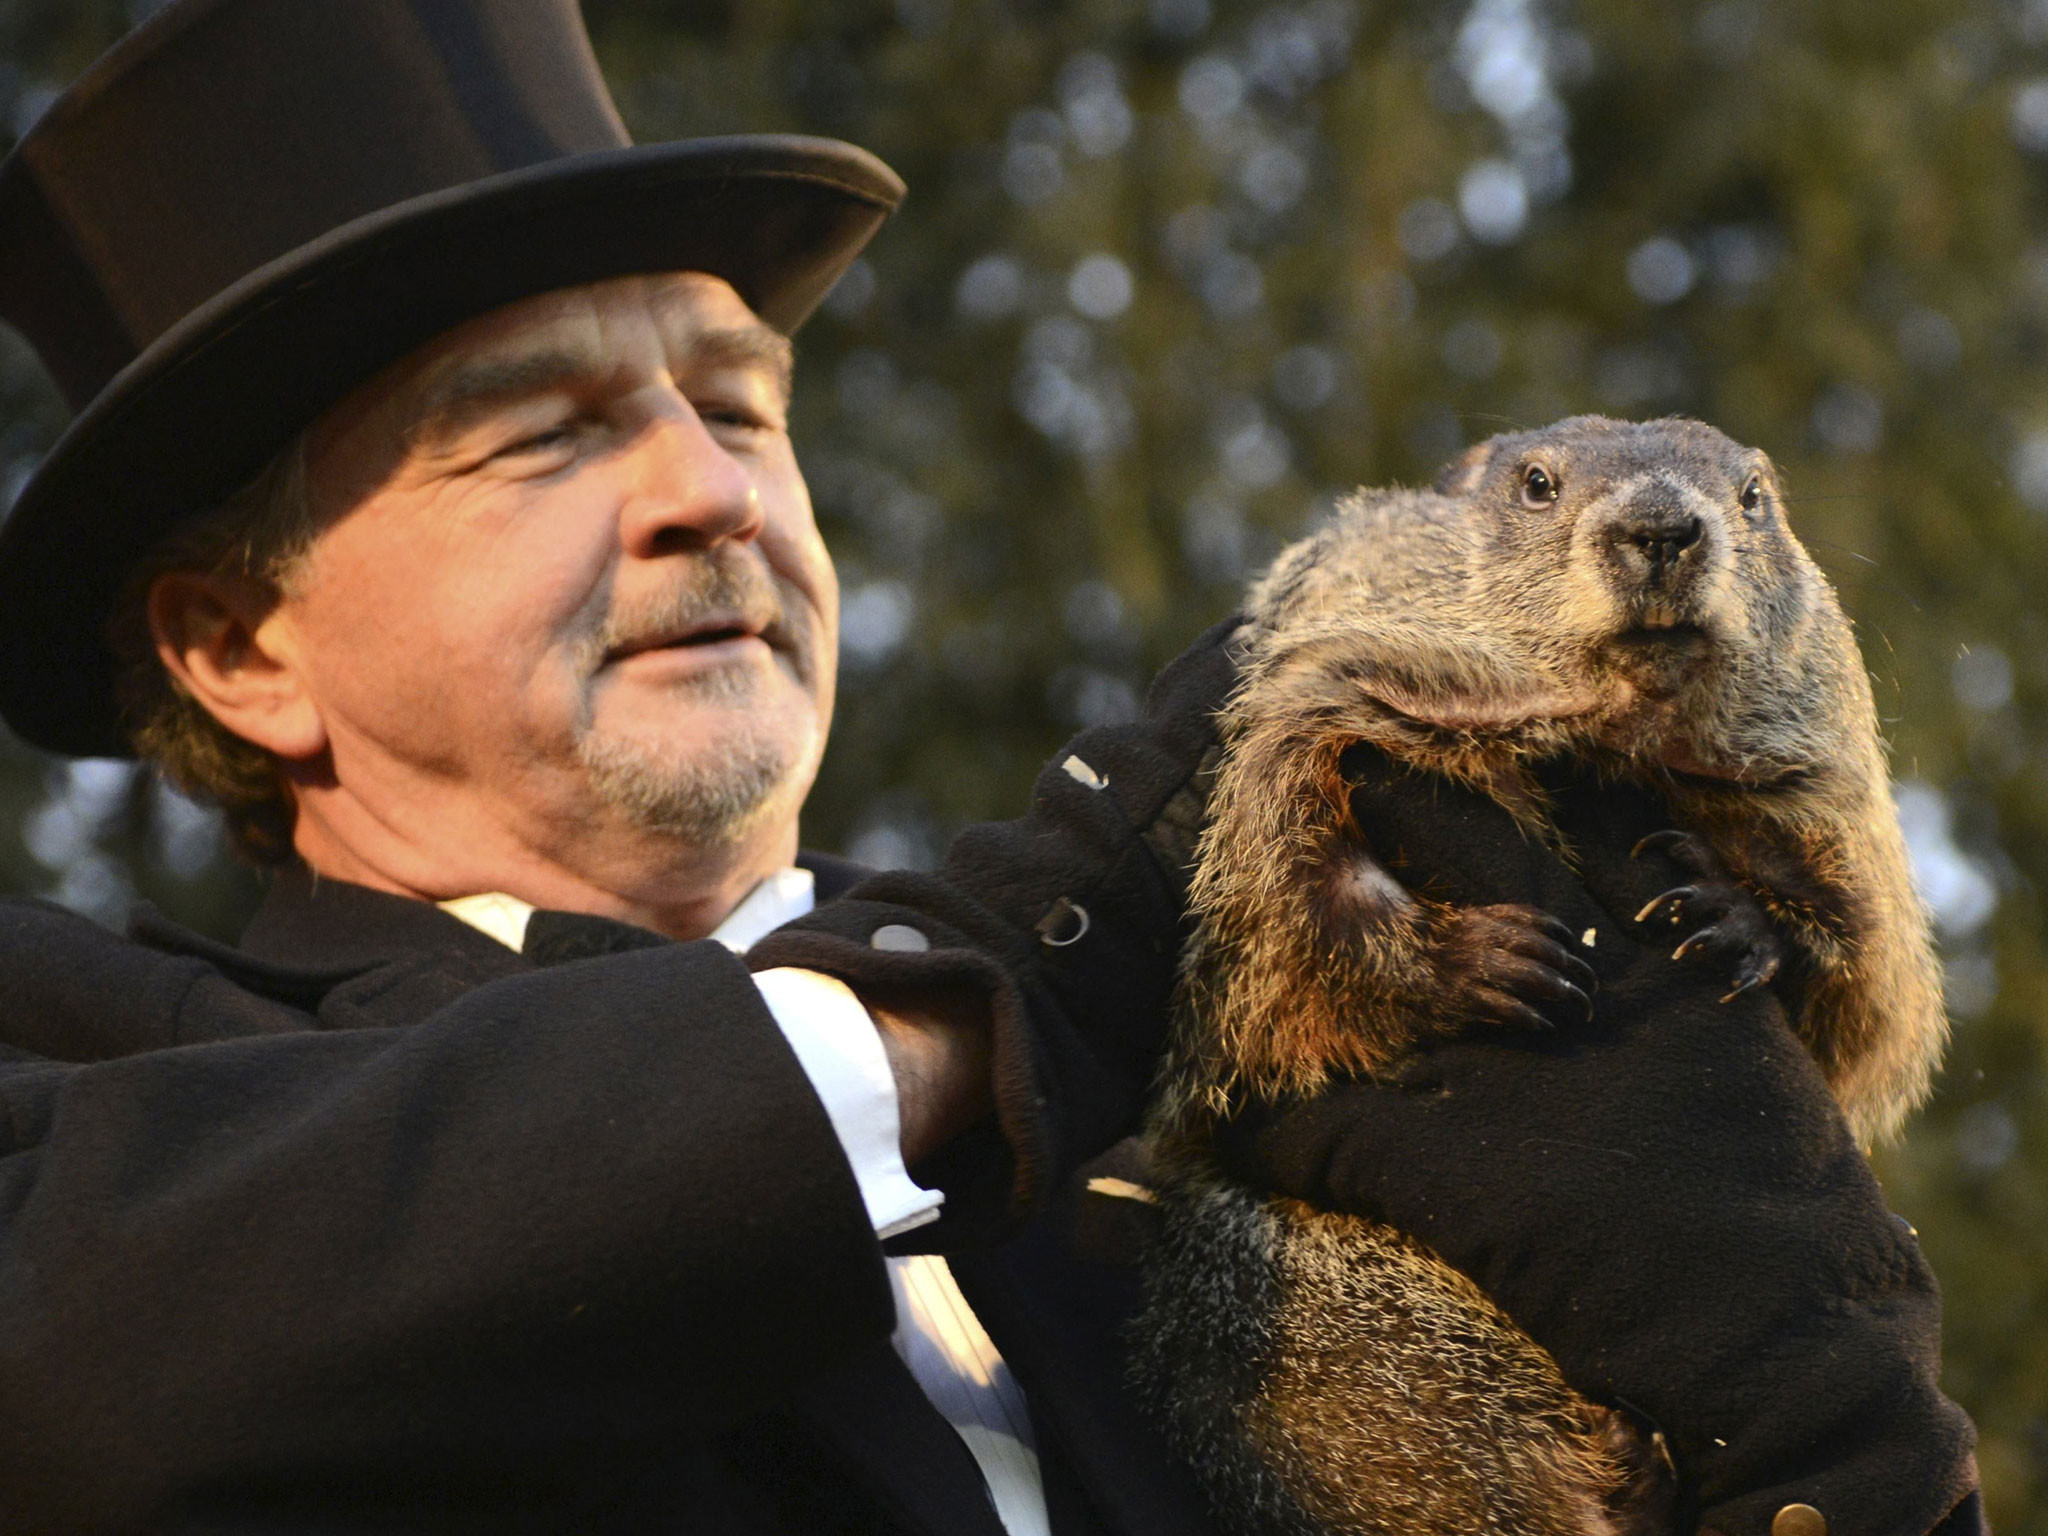 2048x1536 Groundhog Day: Punxsutawney Phil predicts early spring after not seeing  shadow | The Independent